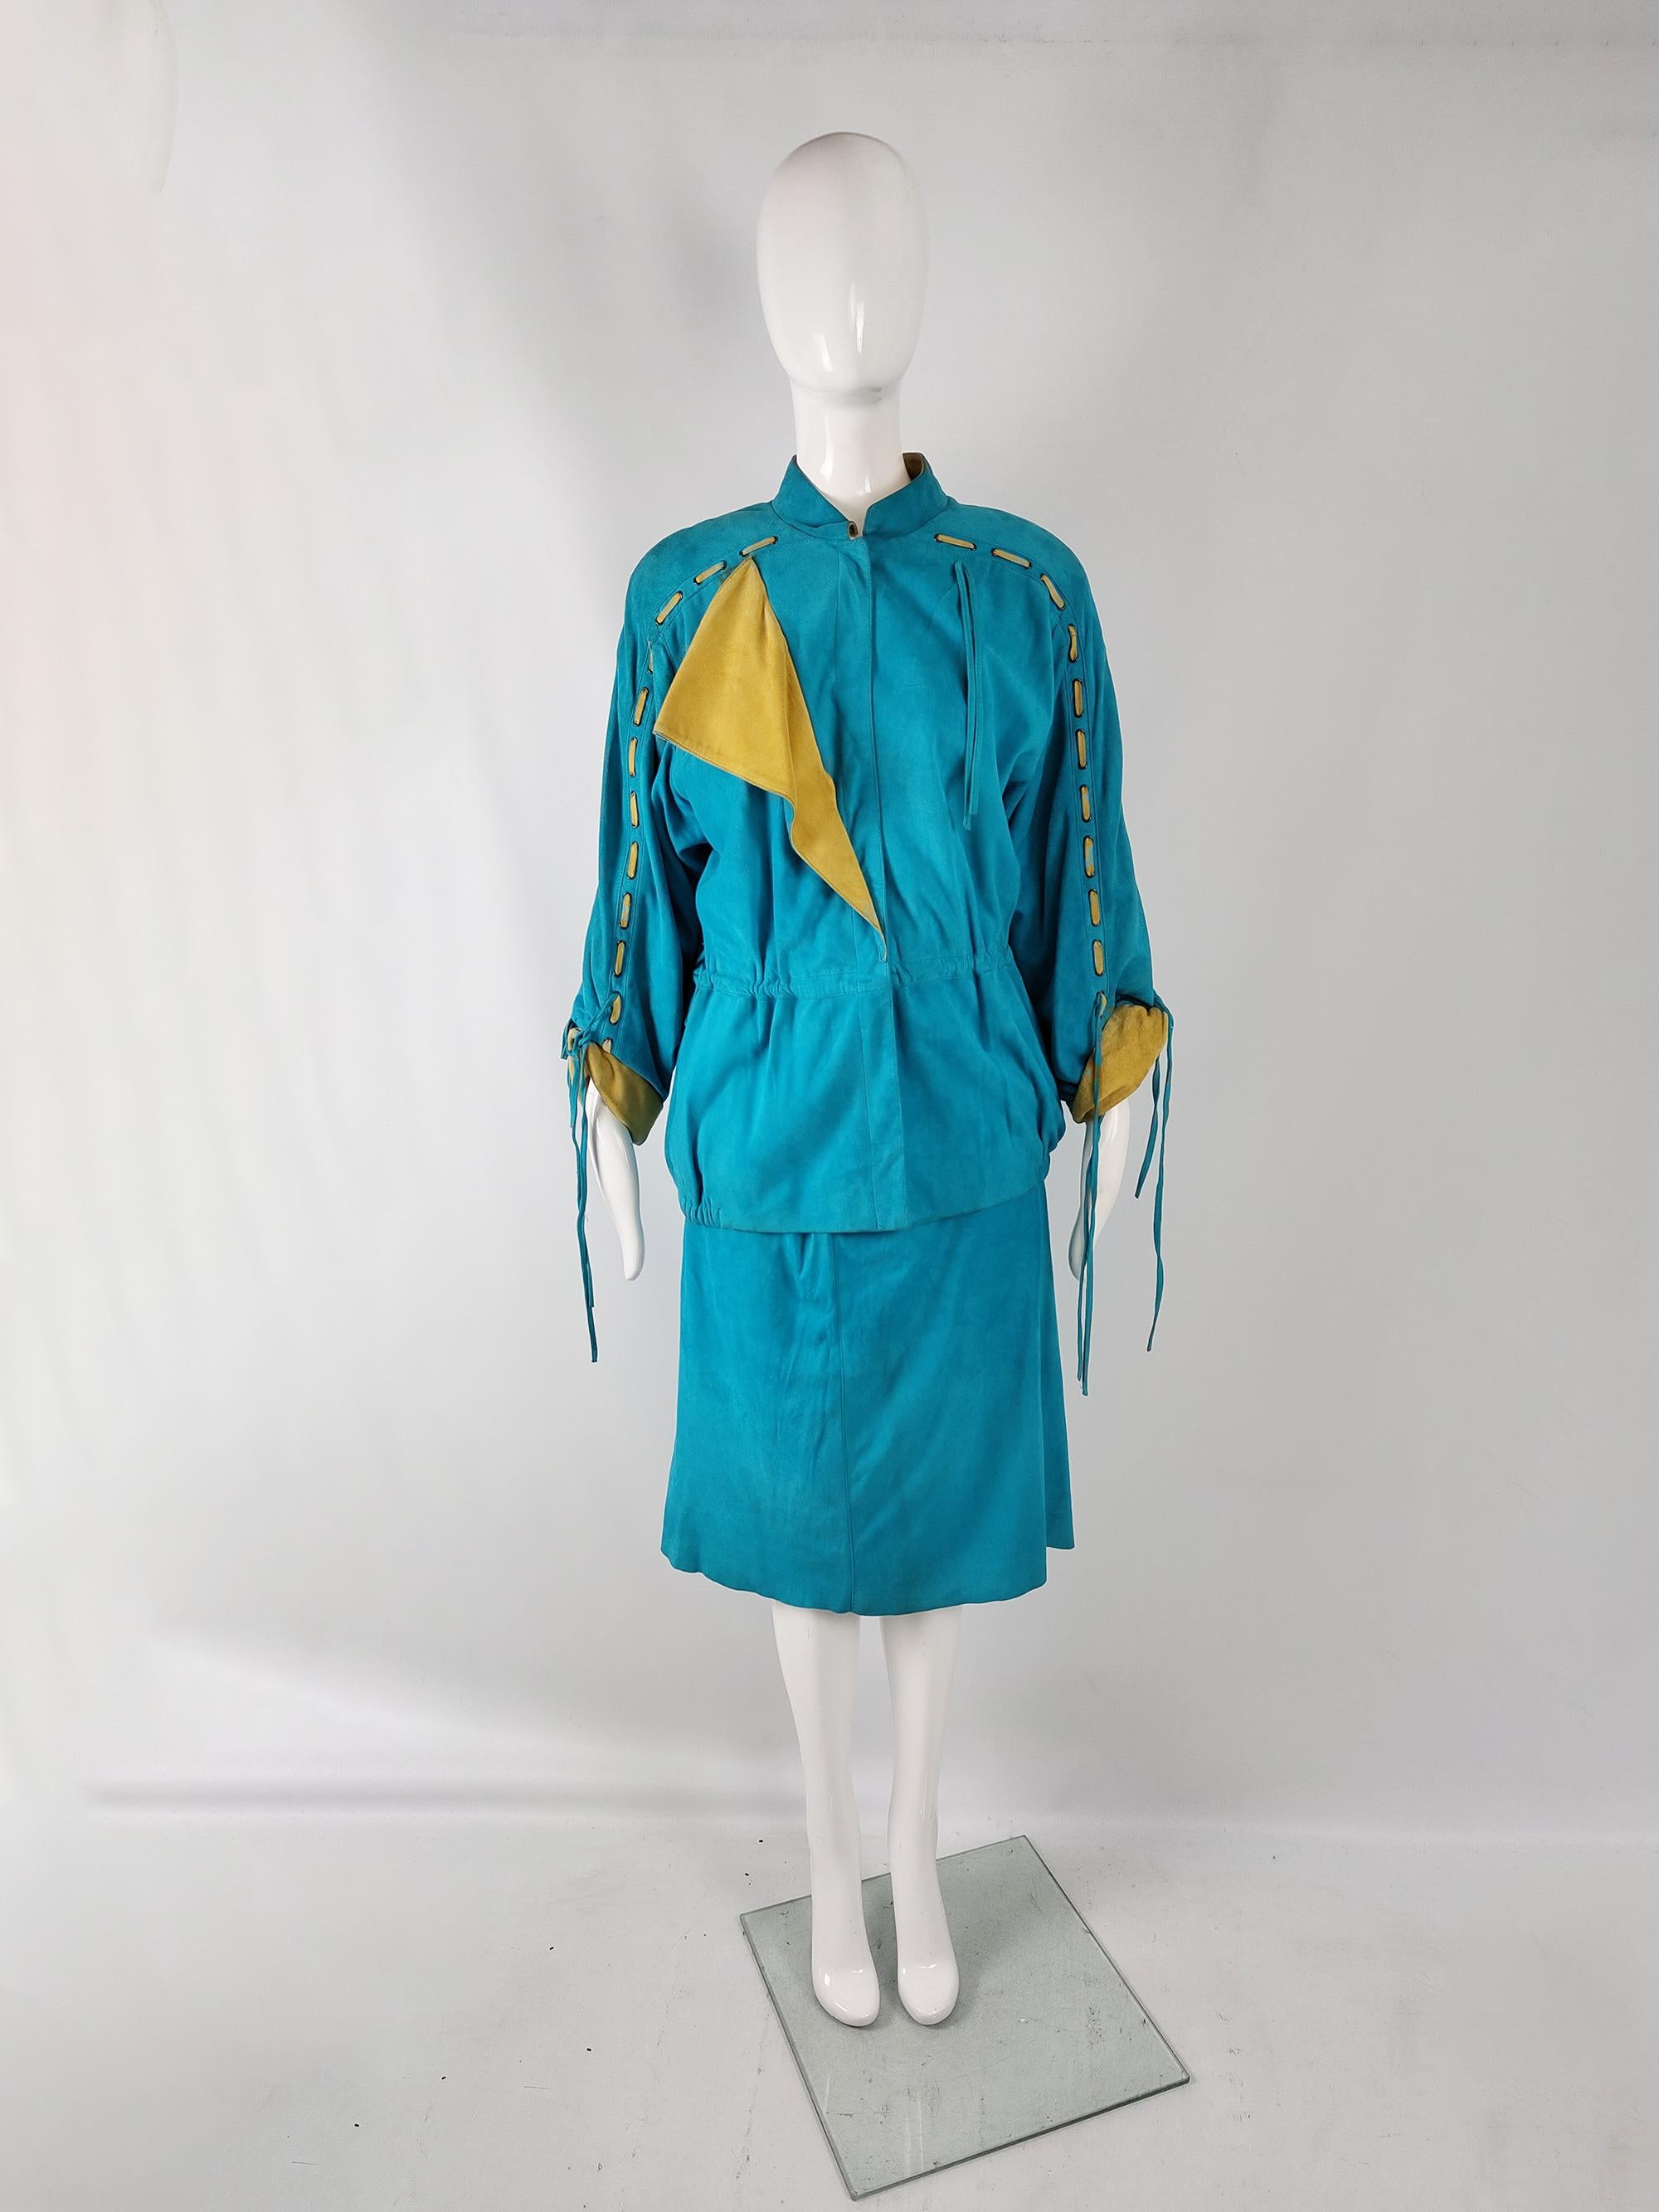 An incredible and rare vintage womens two piece skirt suit from the 80s by luxury Italian fashion designer, Enrico Coveri. Made in Italy, from a vibrant turquoise / teal colour real suede fabric. It consists of a jacket with a very loose, oversized